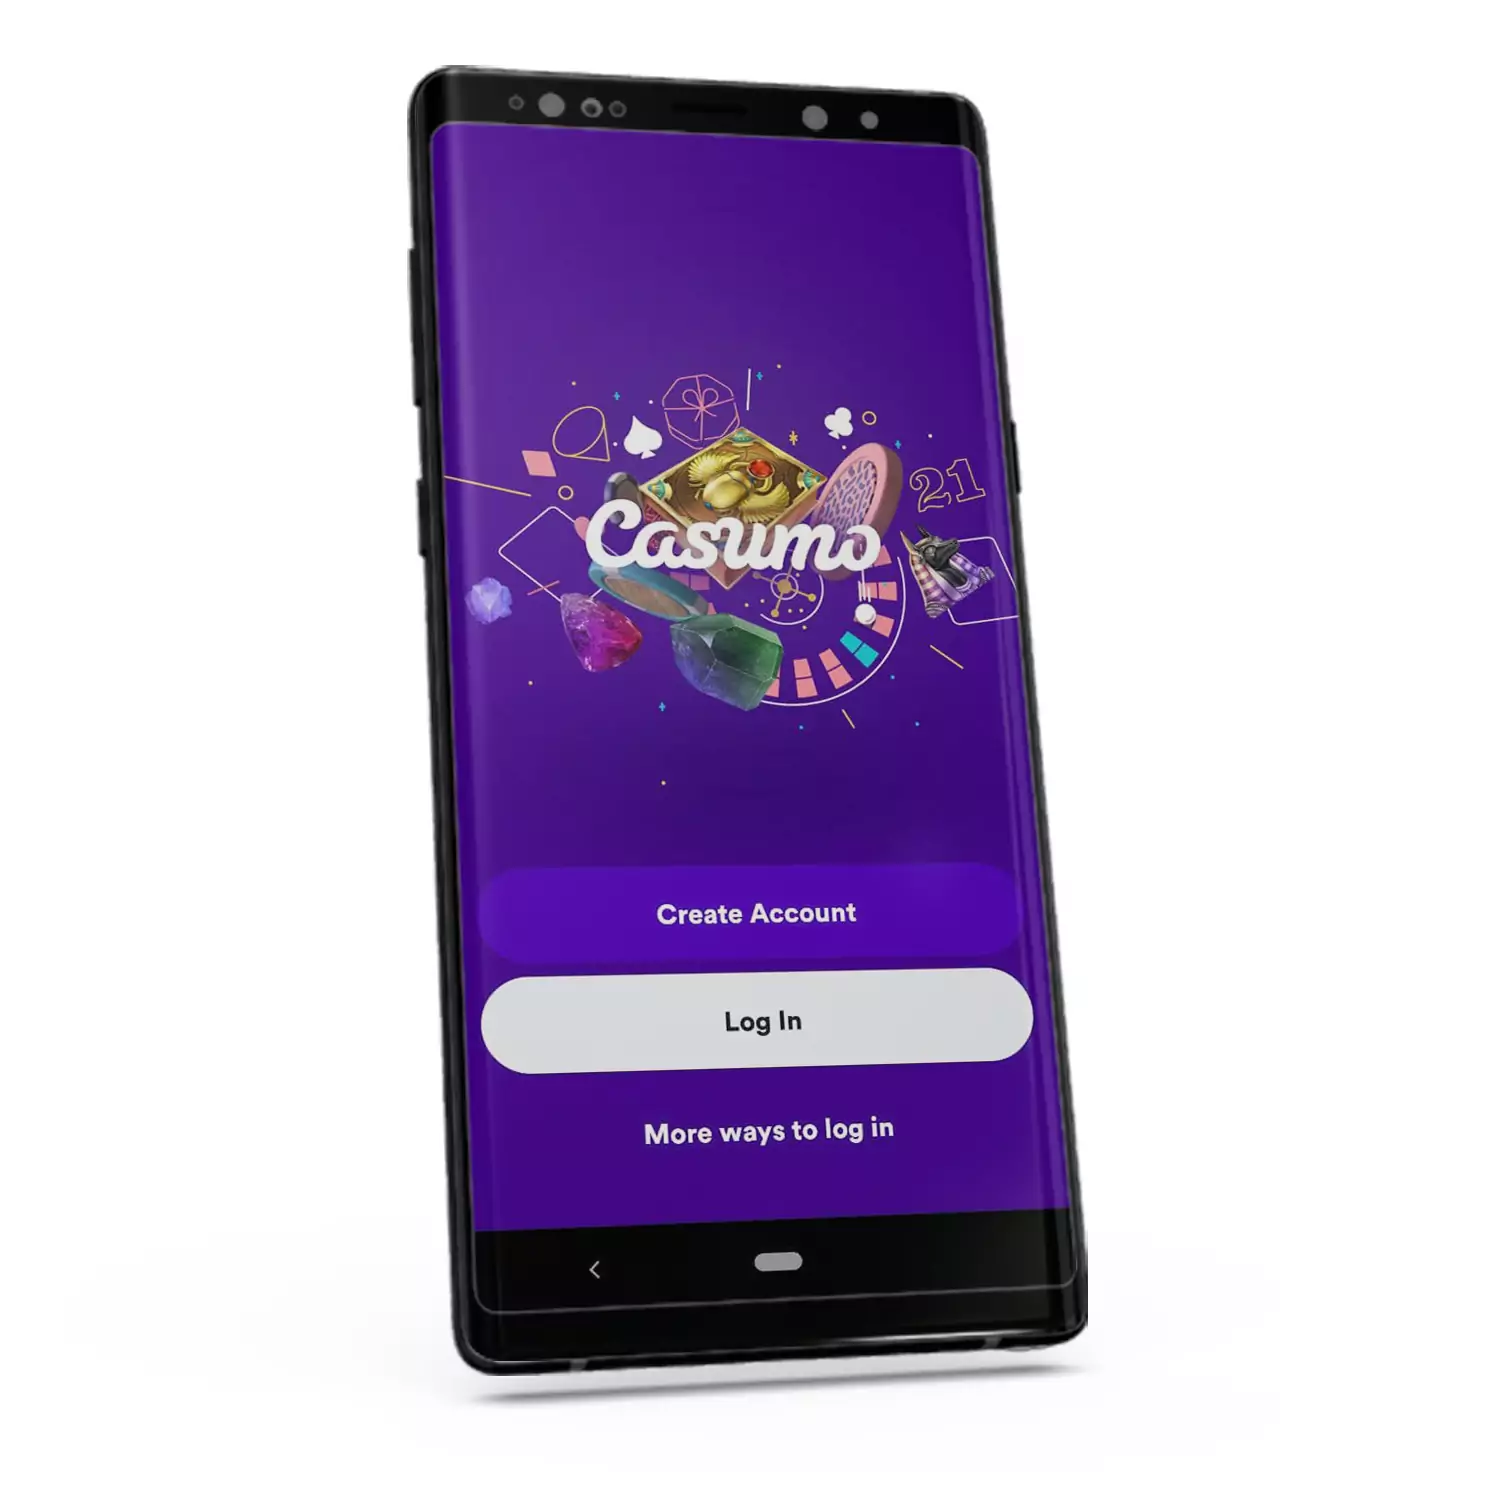 Watch a detailed video review of Casumo application for Android and iOS.